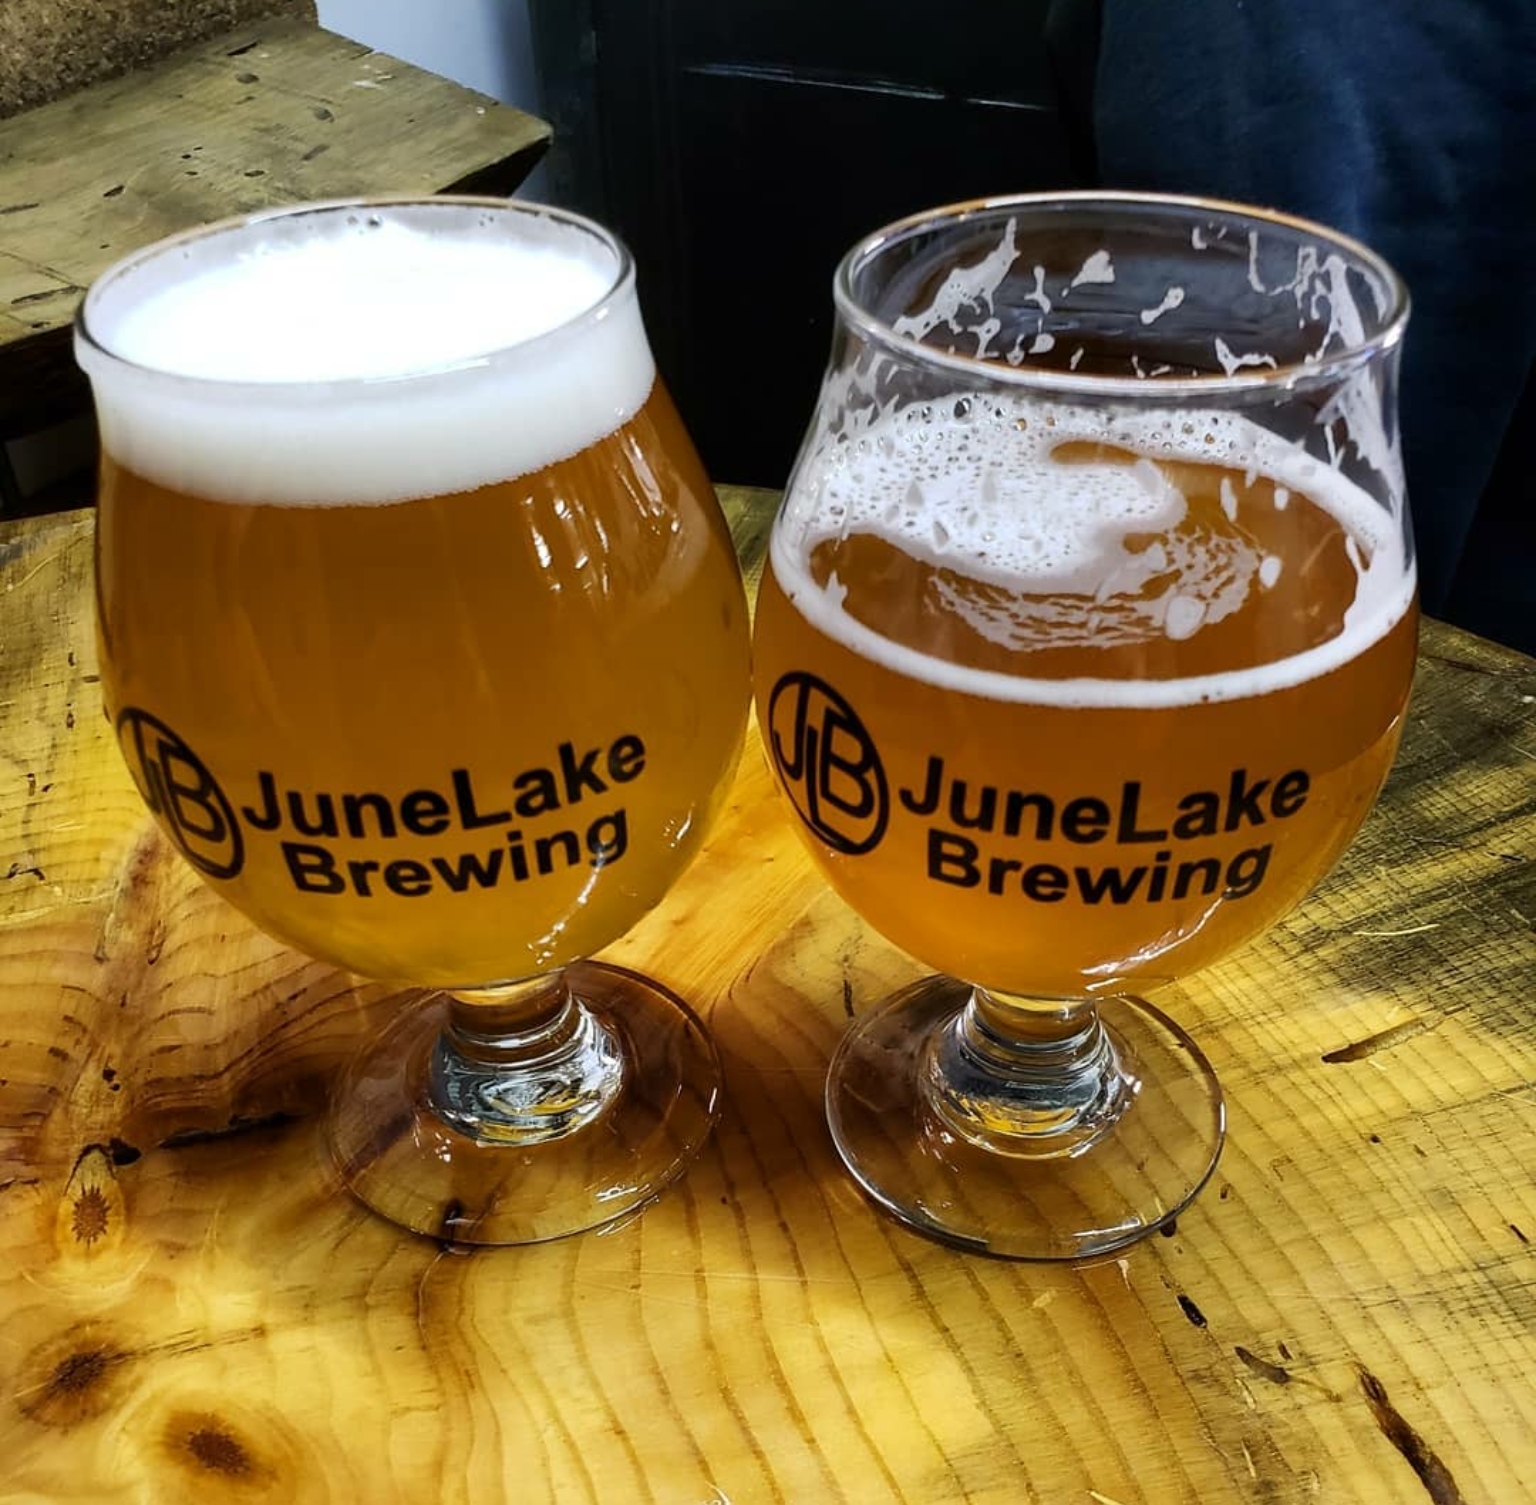 A couple of well-earned beers at June Lake Brewing